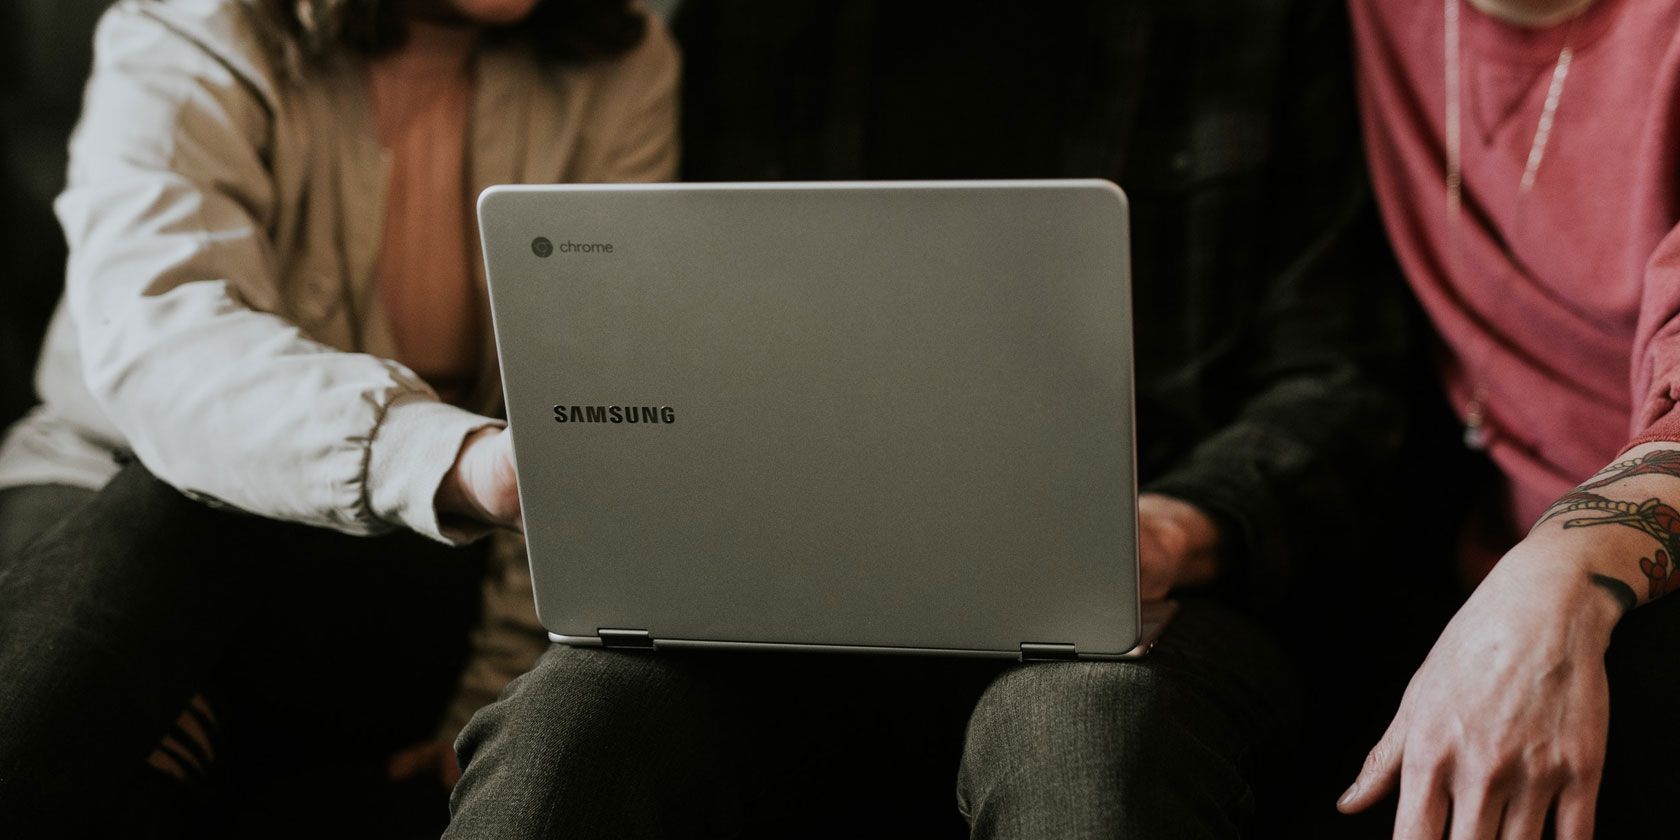 6 Reasons You Should Choose a Chromebook Over a Windows Laptop